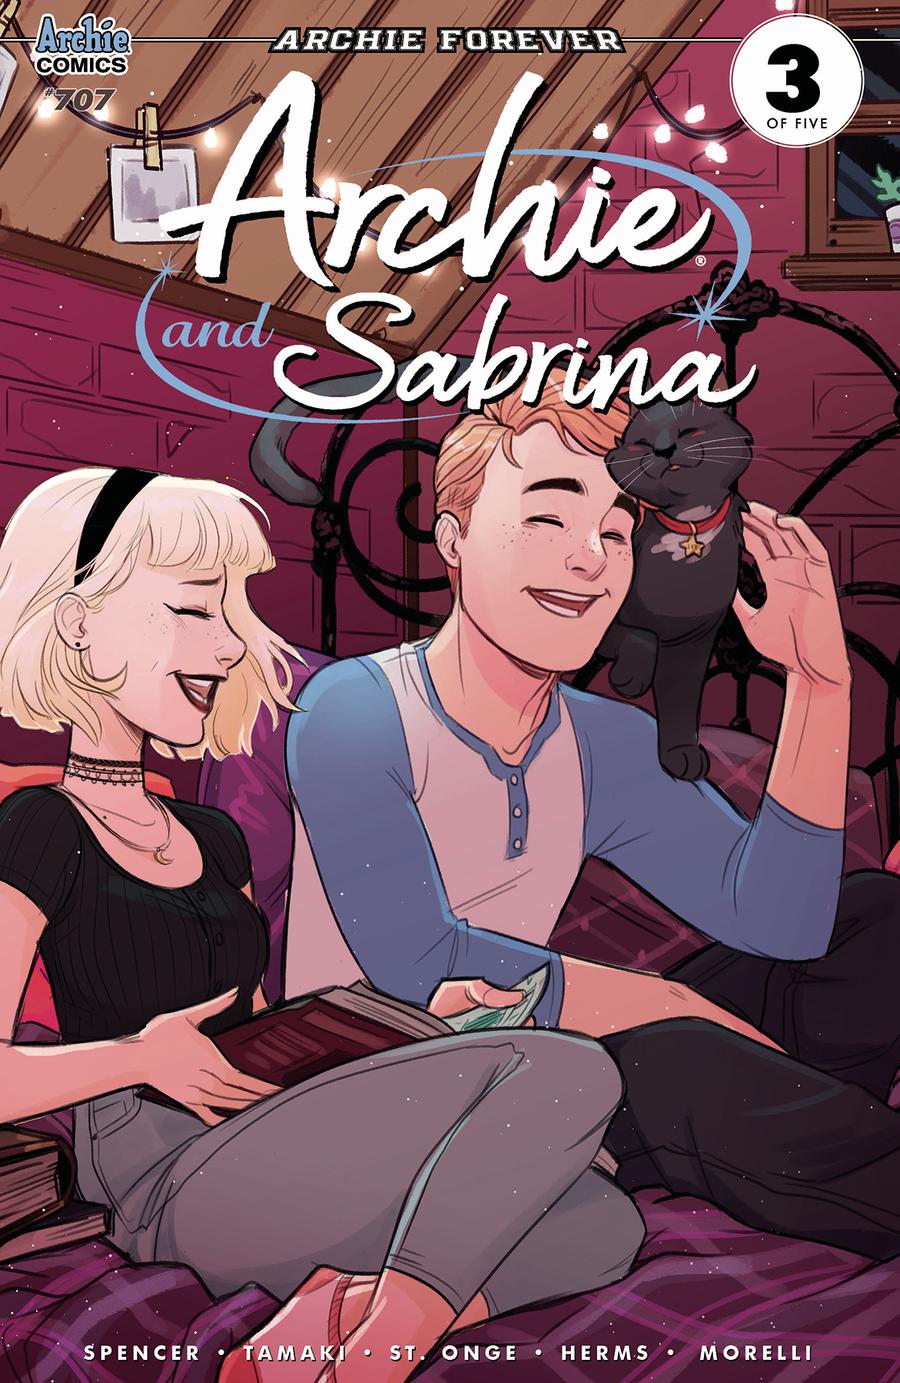 Archie Vol 2 #707 Archie And Sabrina Part 3 Cover A Regular Jenn St Onge Cover